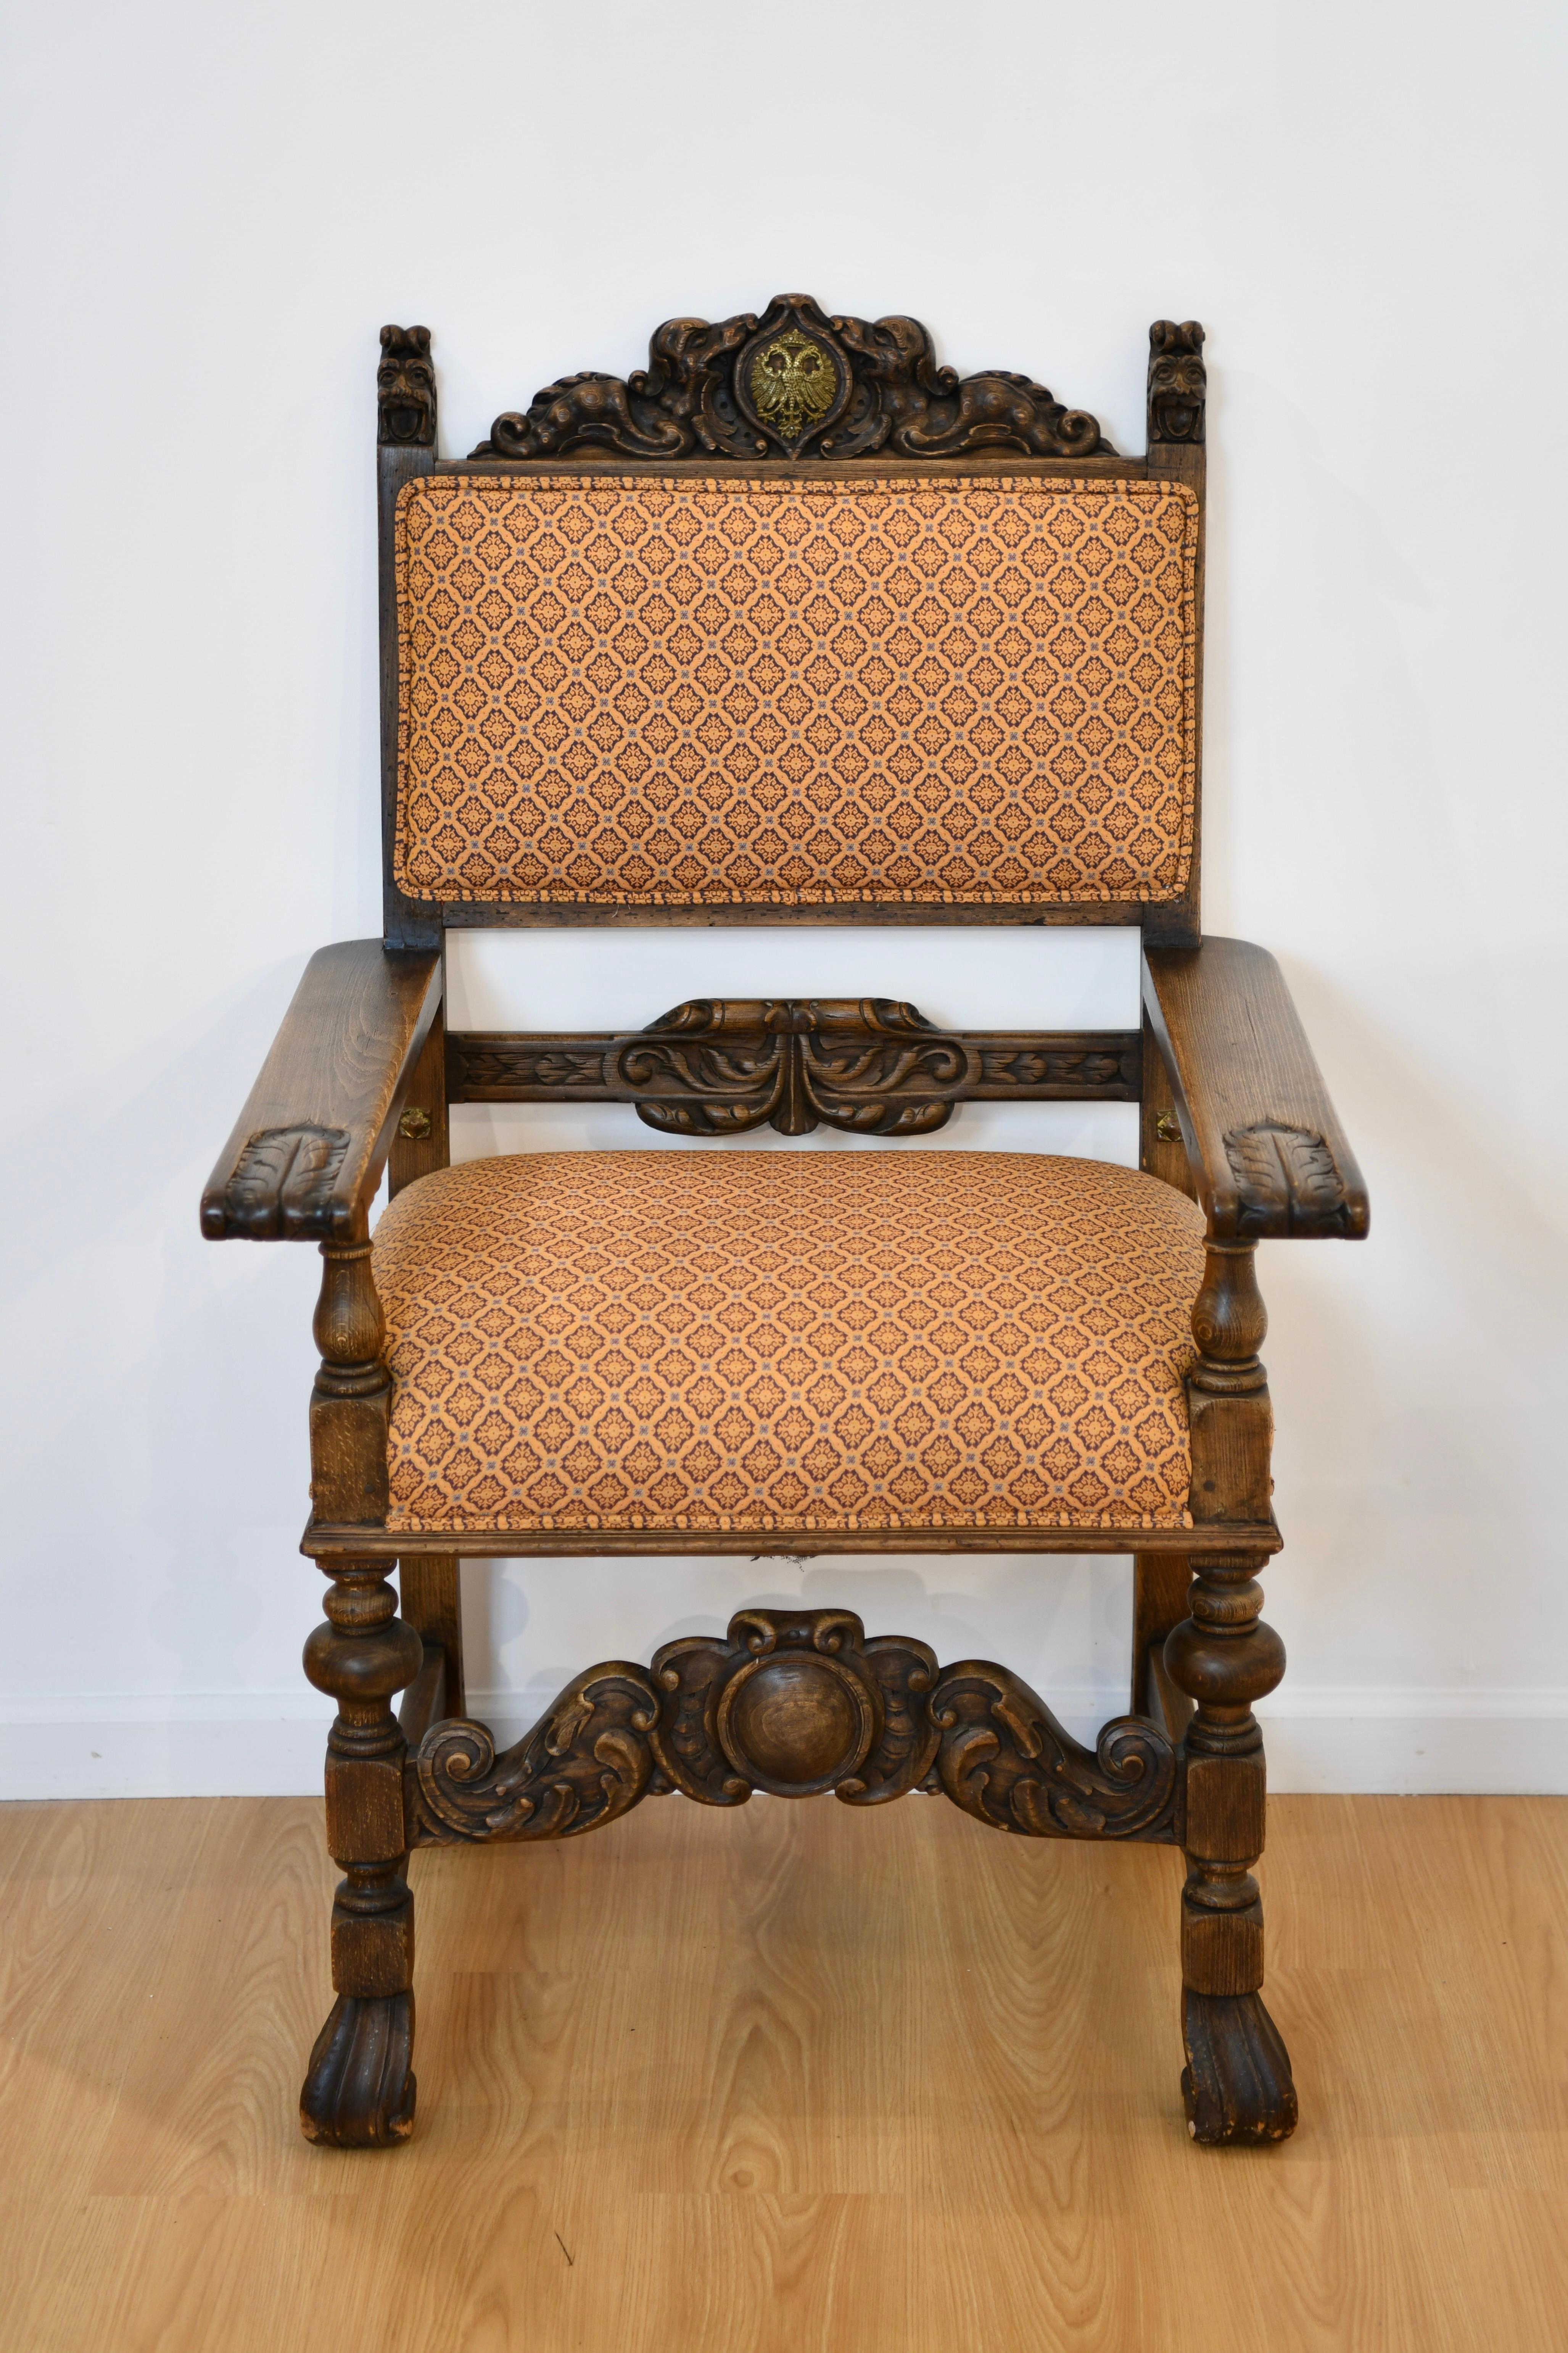 Antique profusely carved Russian throne chair with neutral tone upholstery. Dimensions: 46